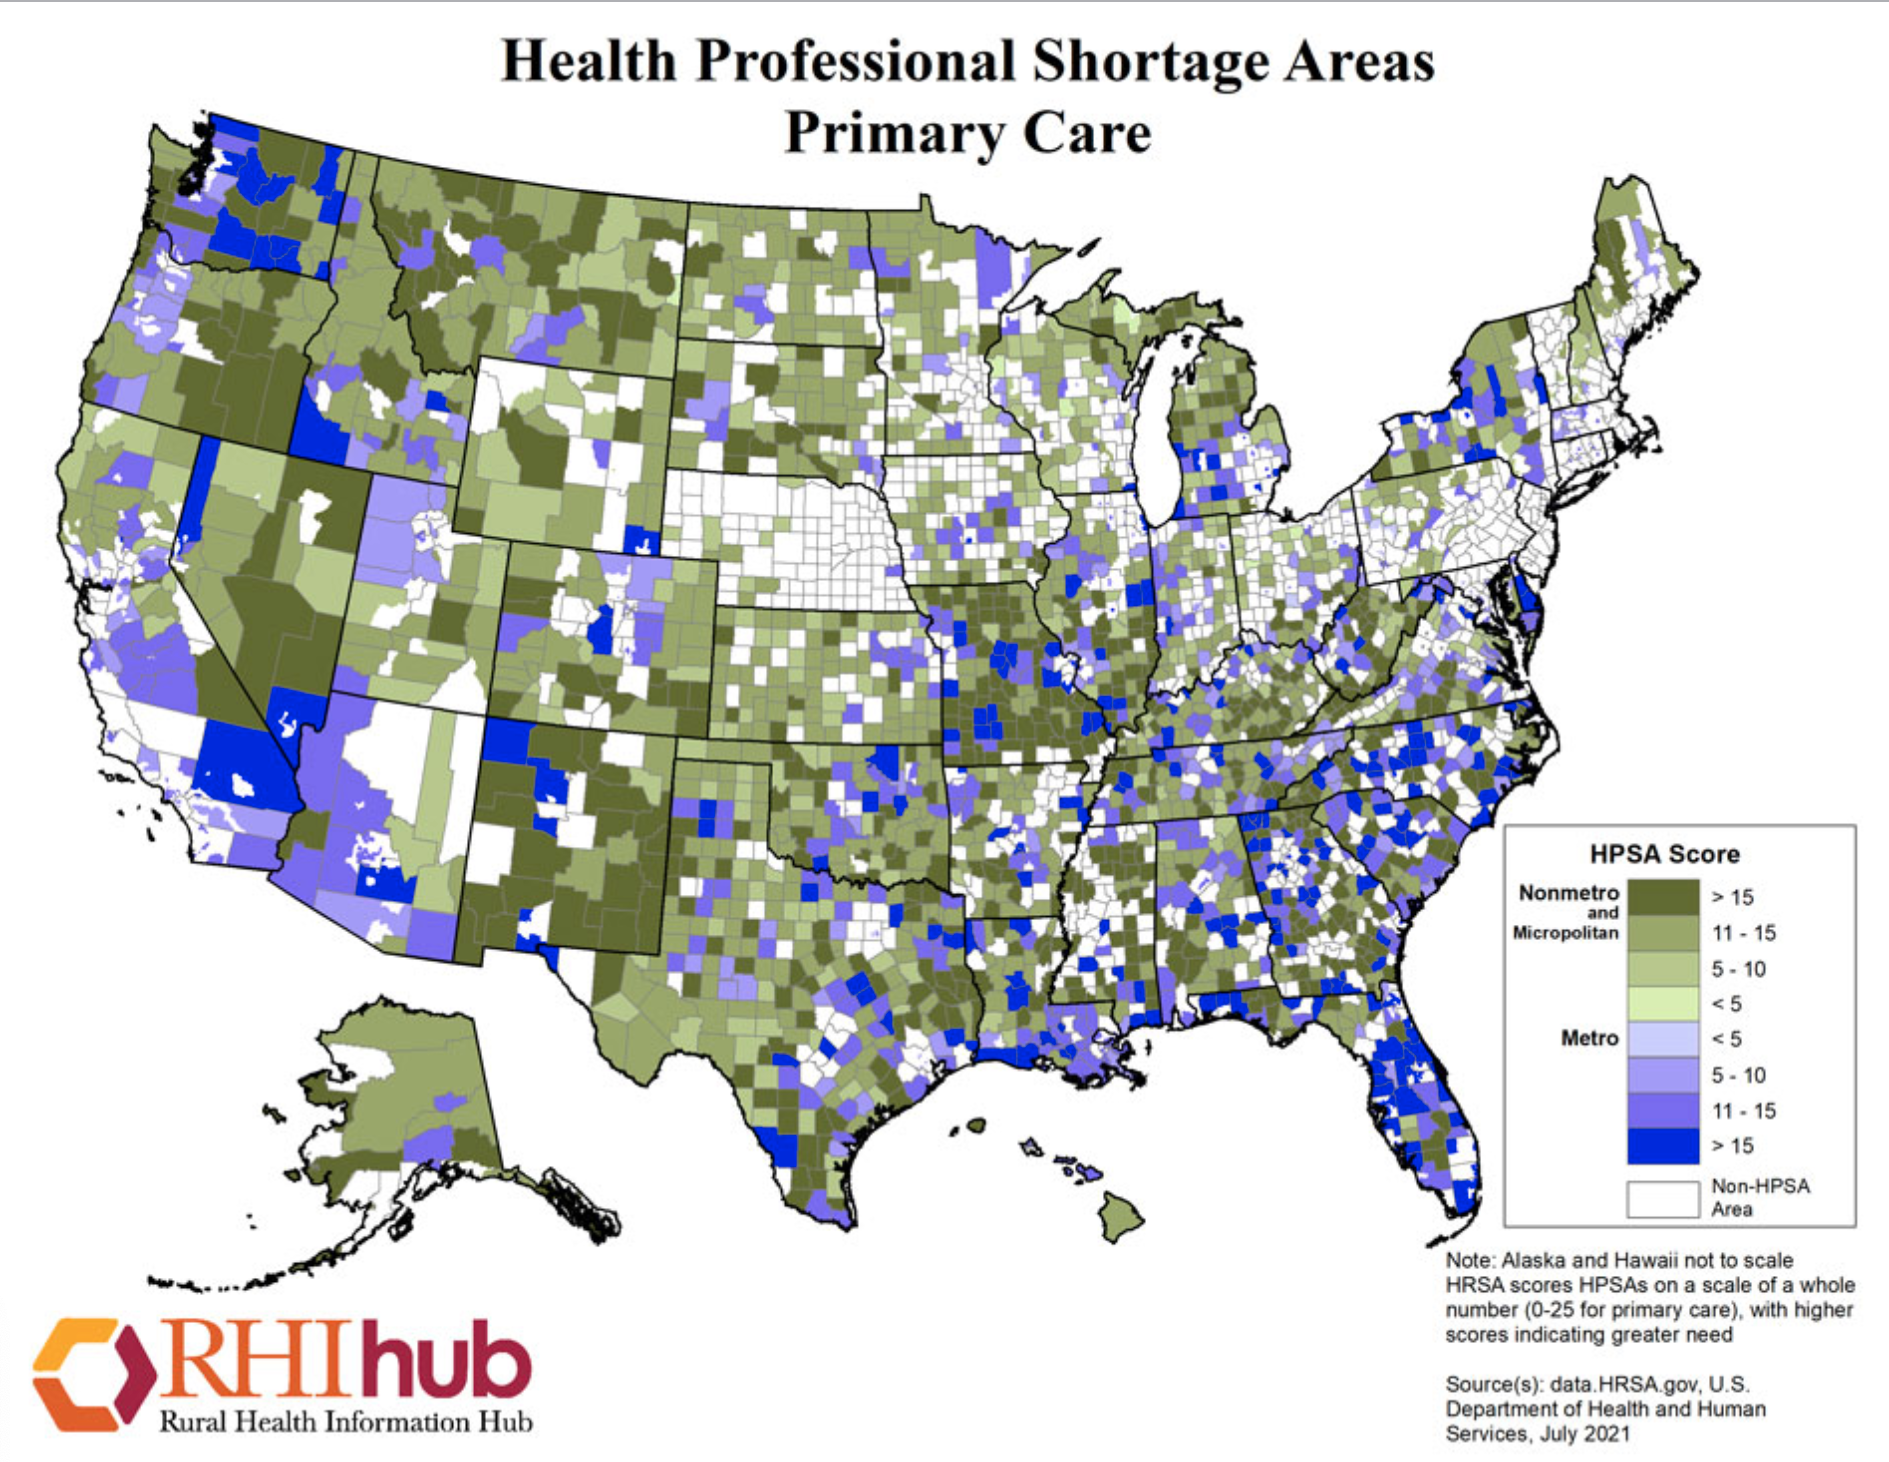 Medical professional shortage rate in the US rural areas